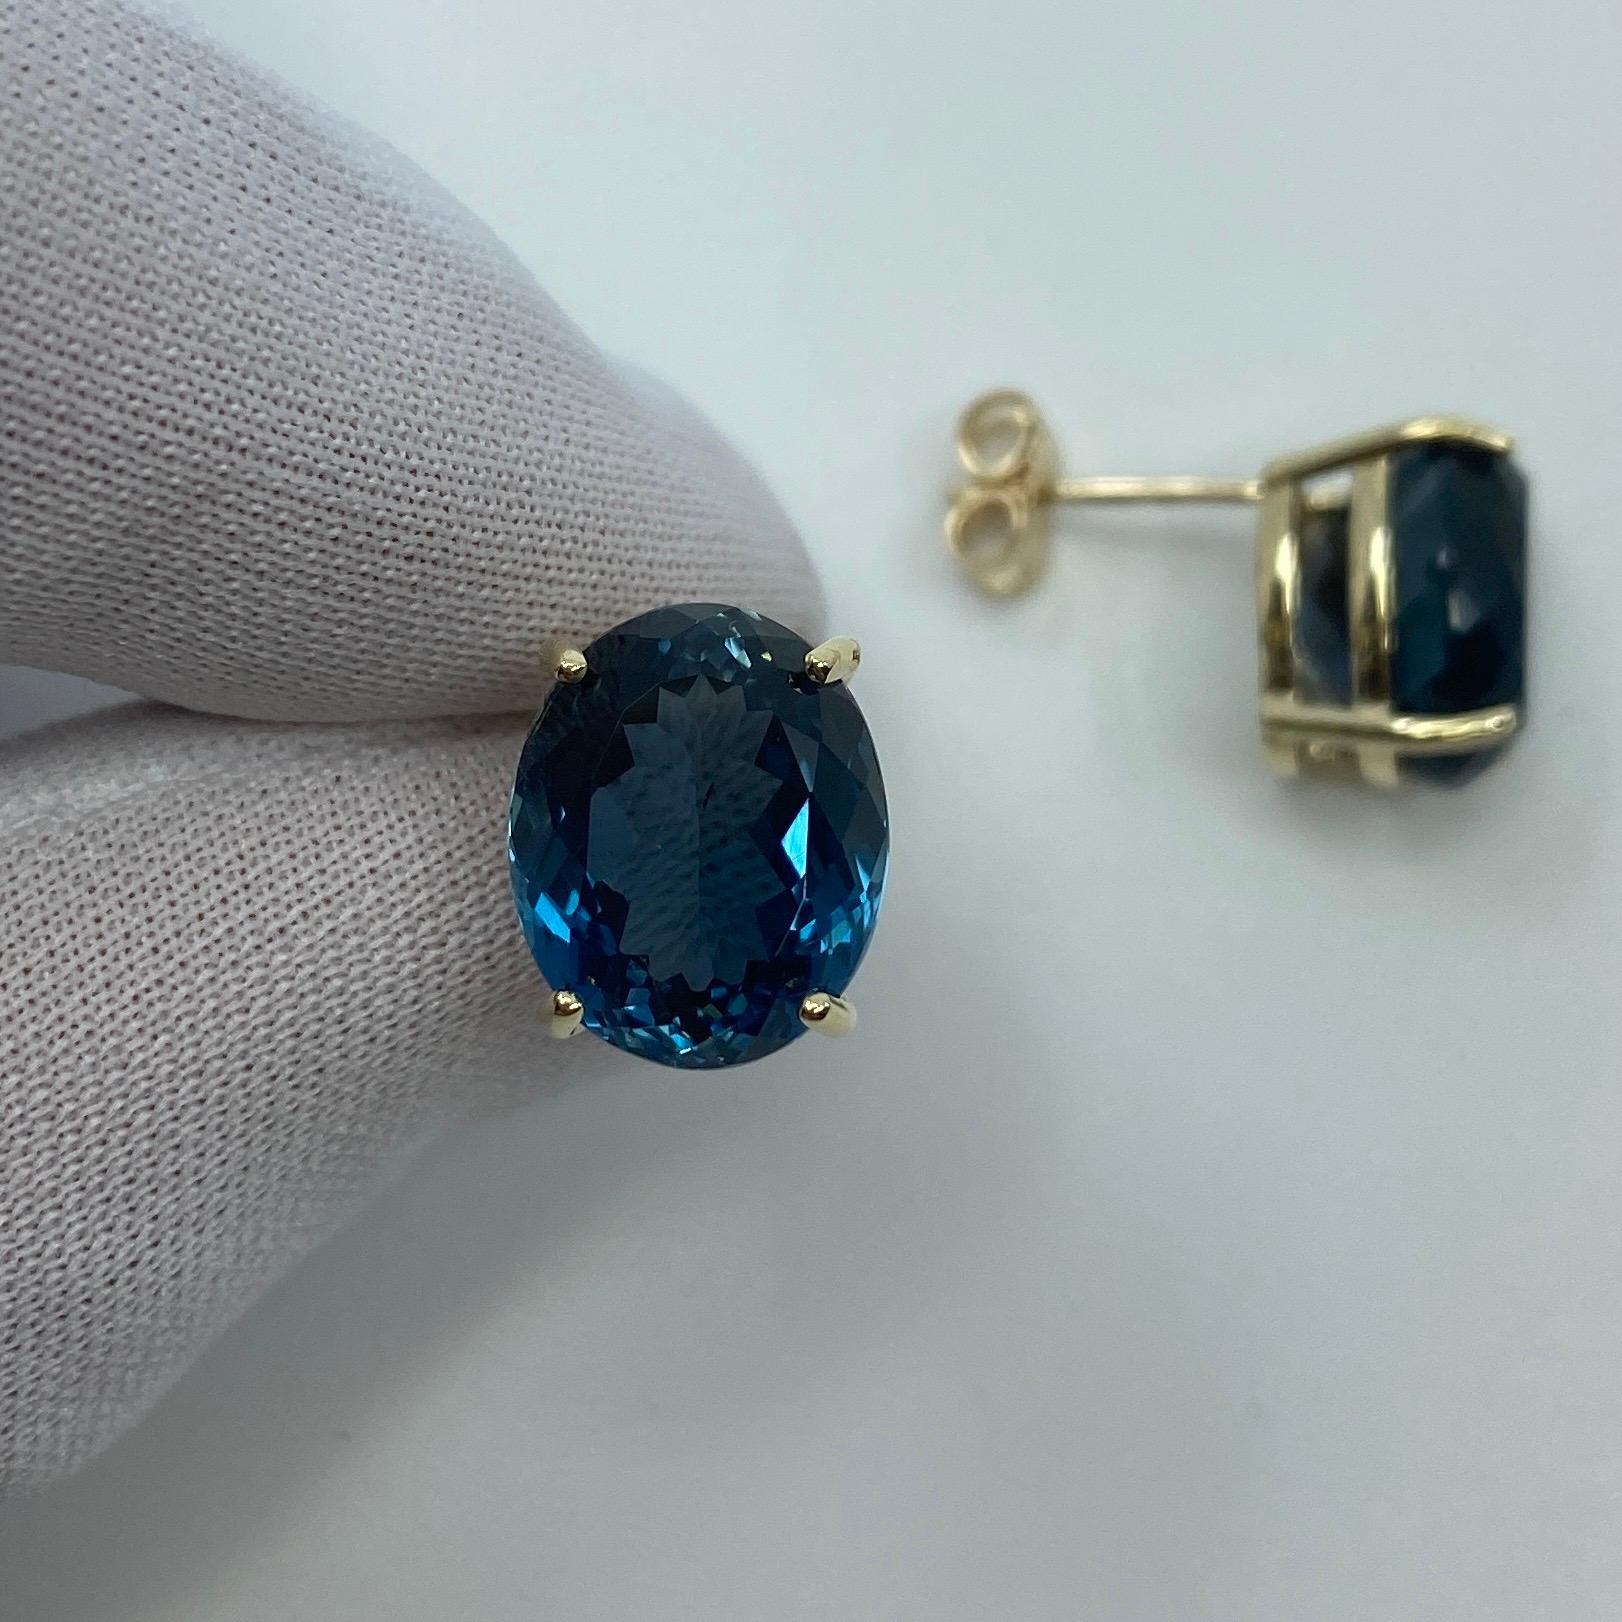 Large 17.53ct Fine London Blue Topaz Oval Cut Yellow Gold Earring Studs For Sale 3